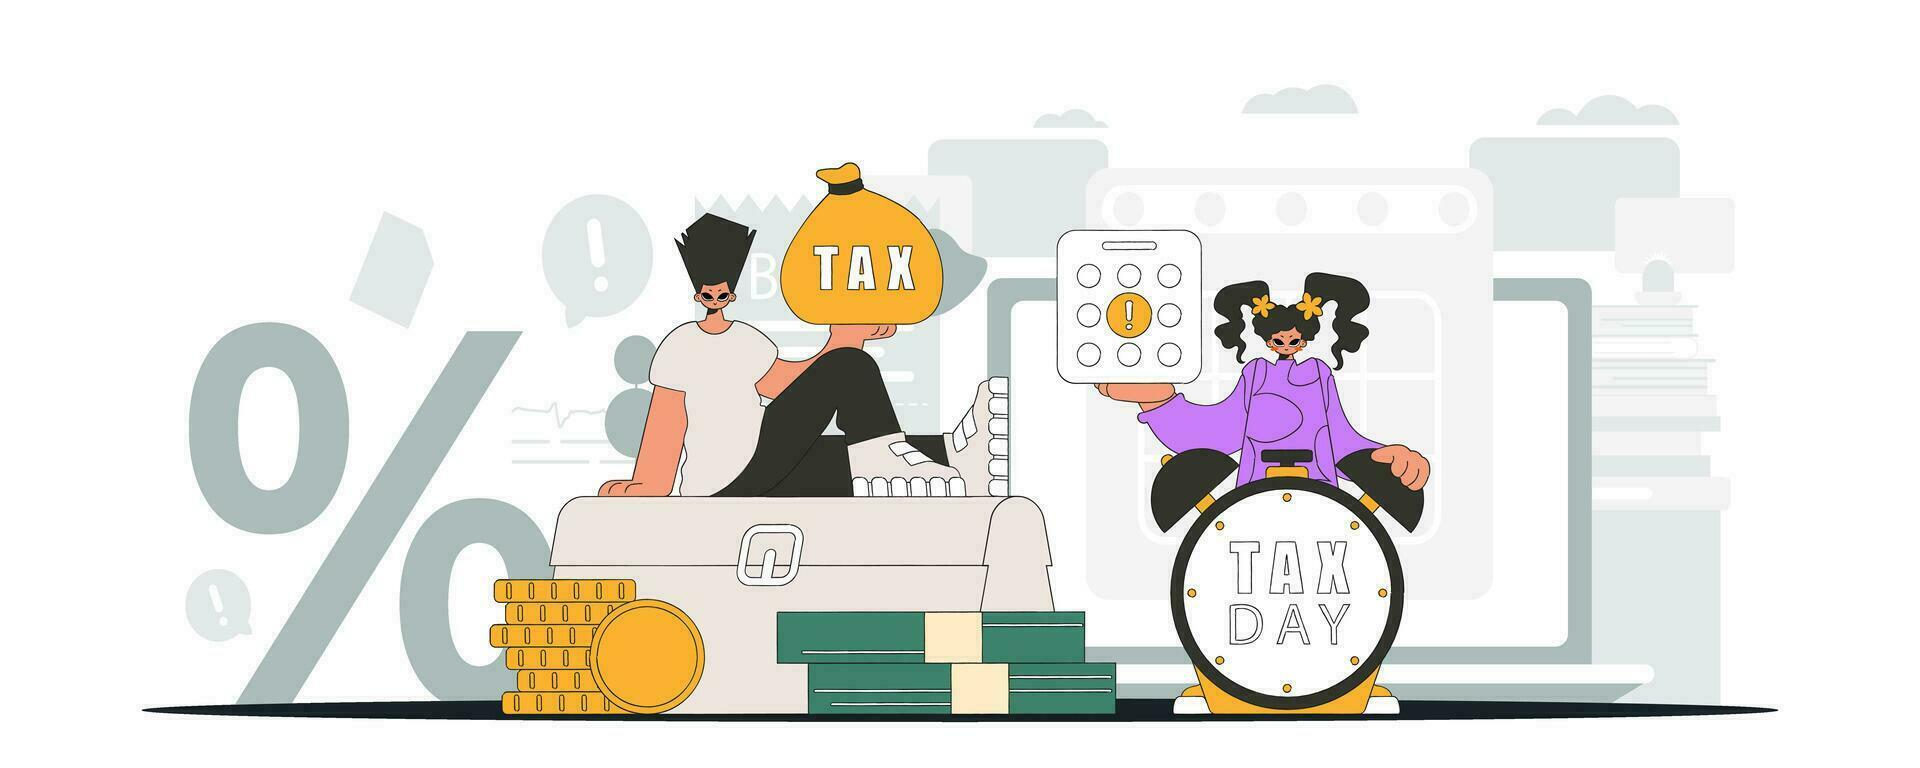 Fashionable girl and guy demonstrate paying taxes. An illustration demonstrating the correct payment of taxes. vector